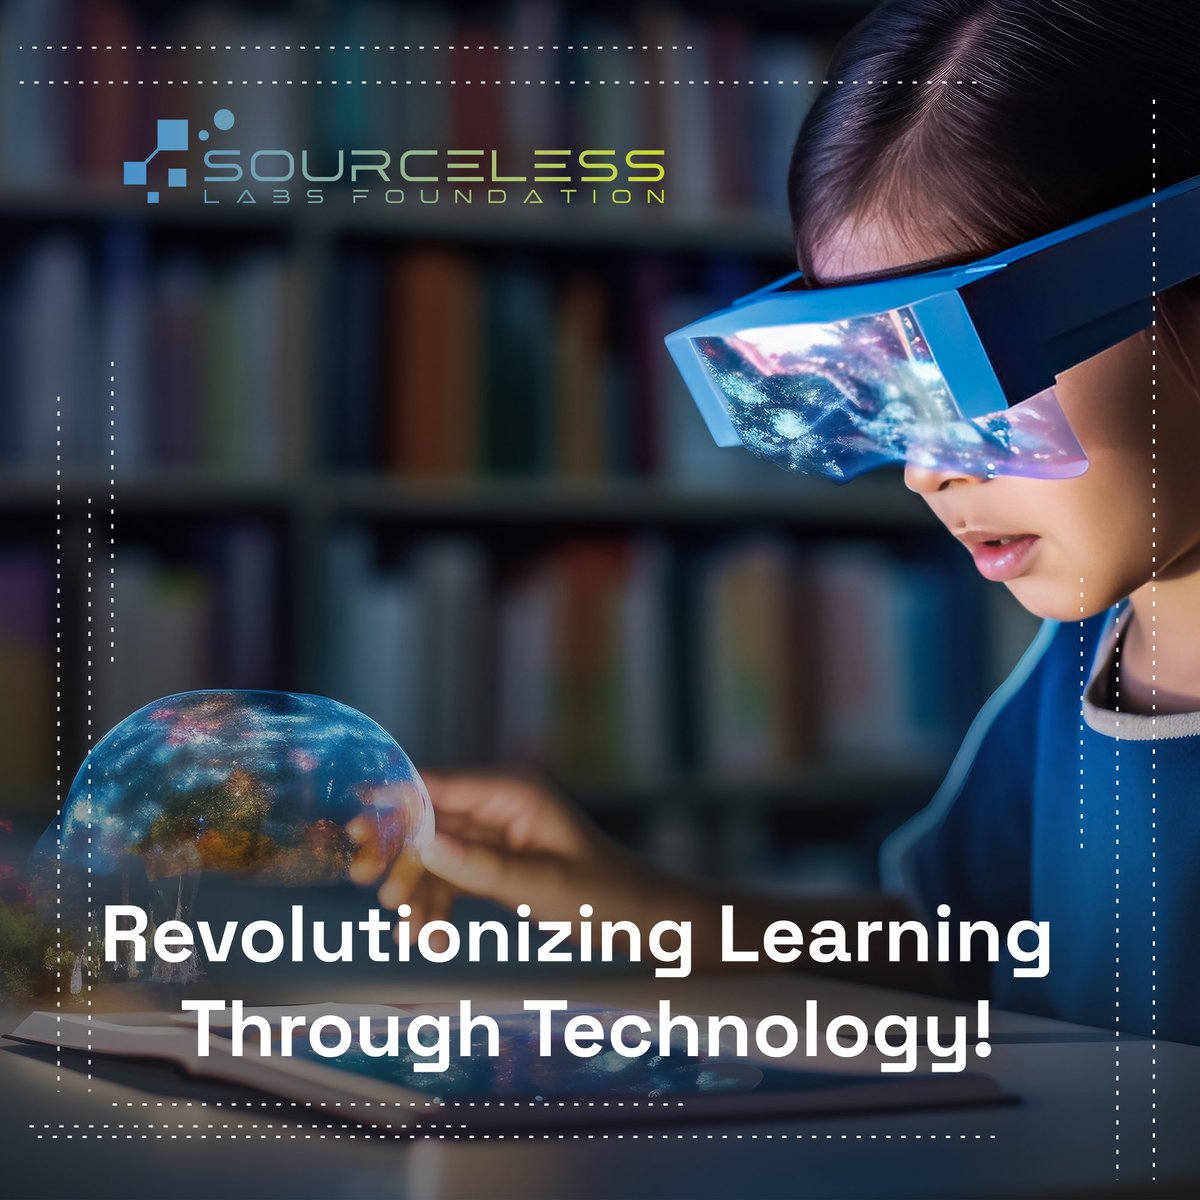 Transforming education through cuting-edge technology is our mission at SourceLess Labs Foundation. From interactive learning to digital classrooms, we're reshaping the way knowledge is acquired. Join us on this revolution! #EdTechRevolution #SourceLessLabs